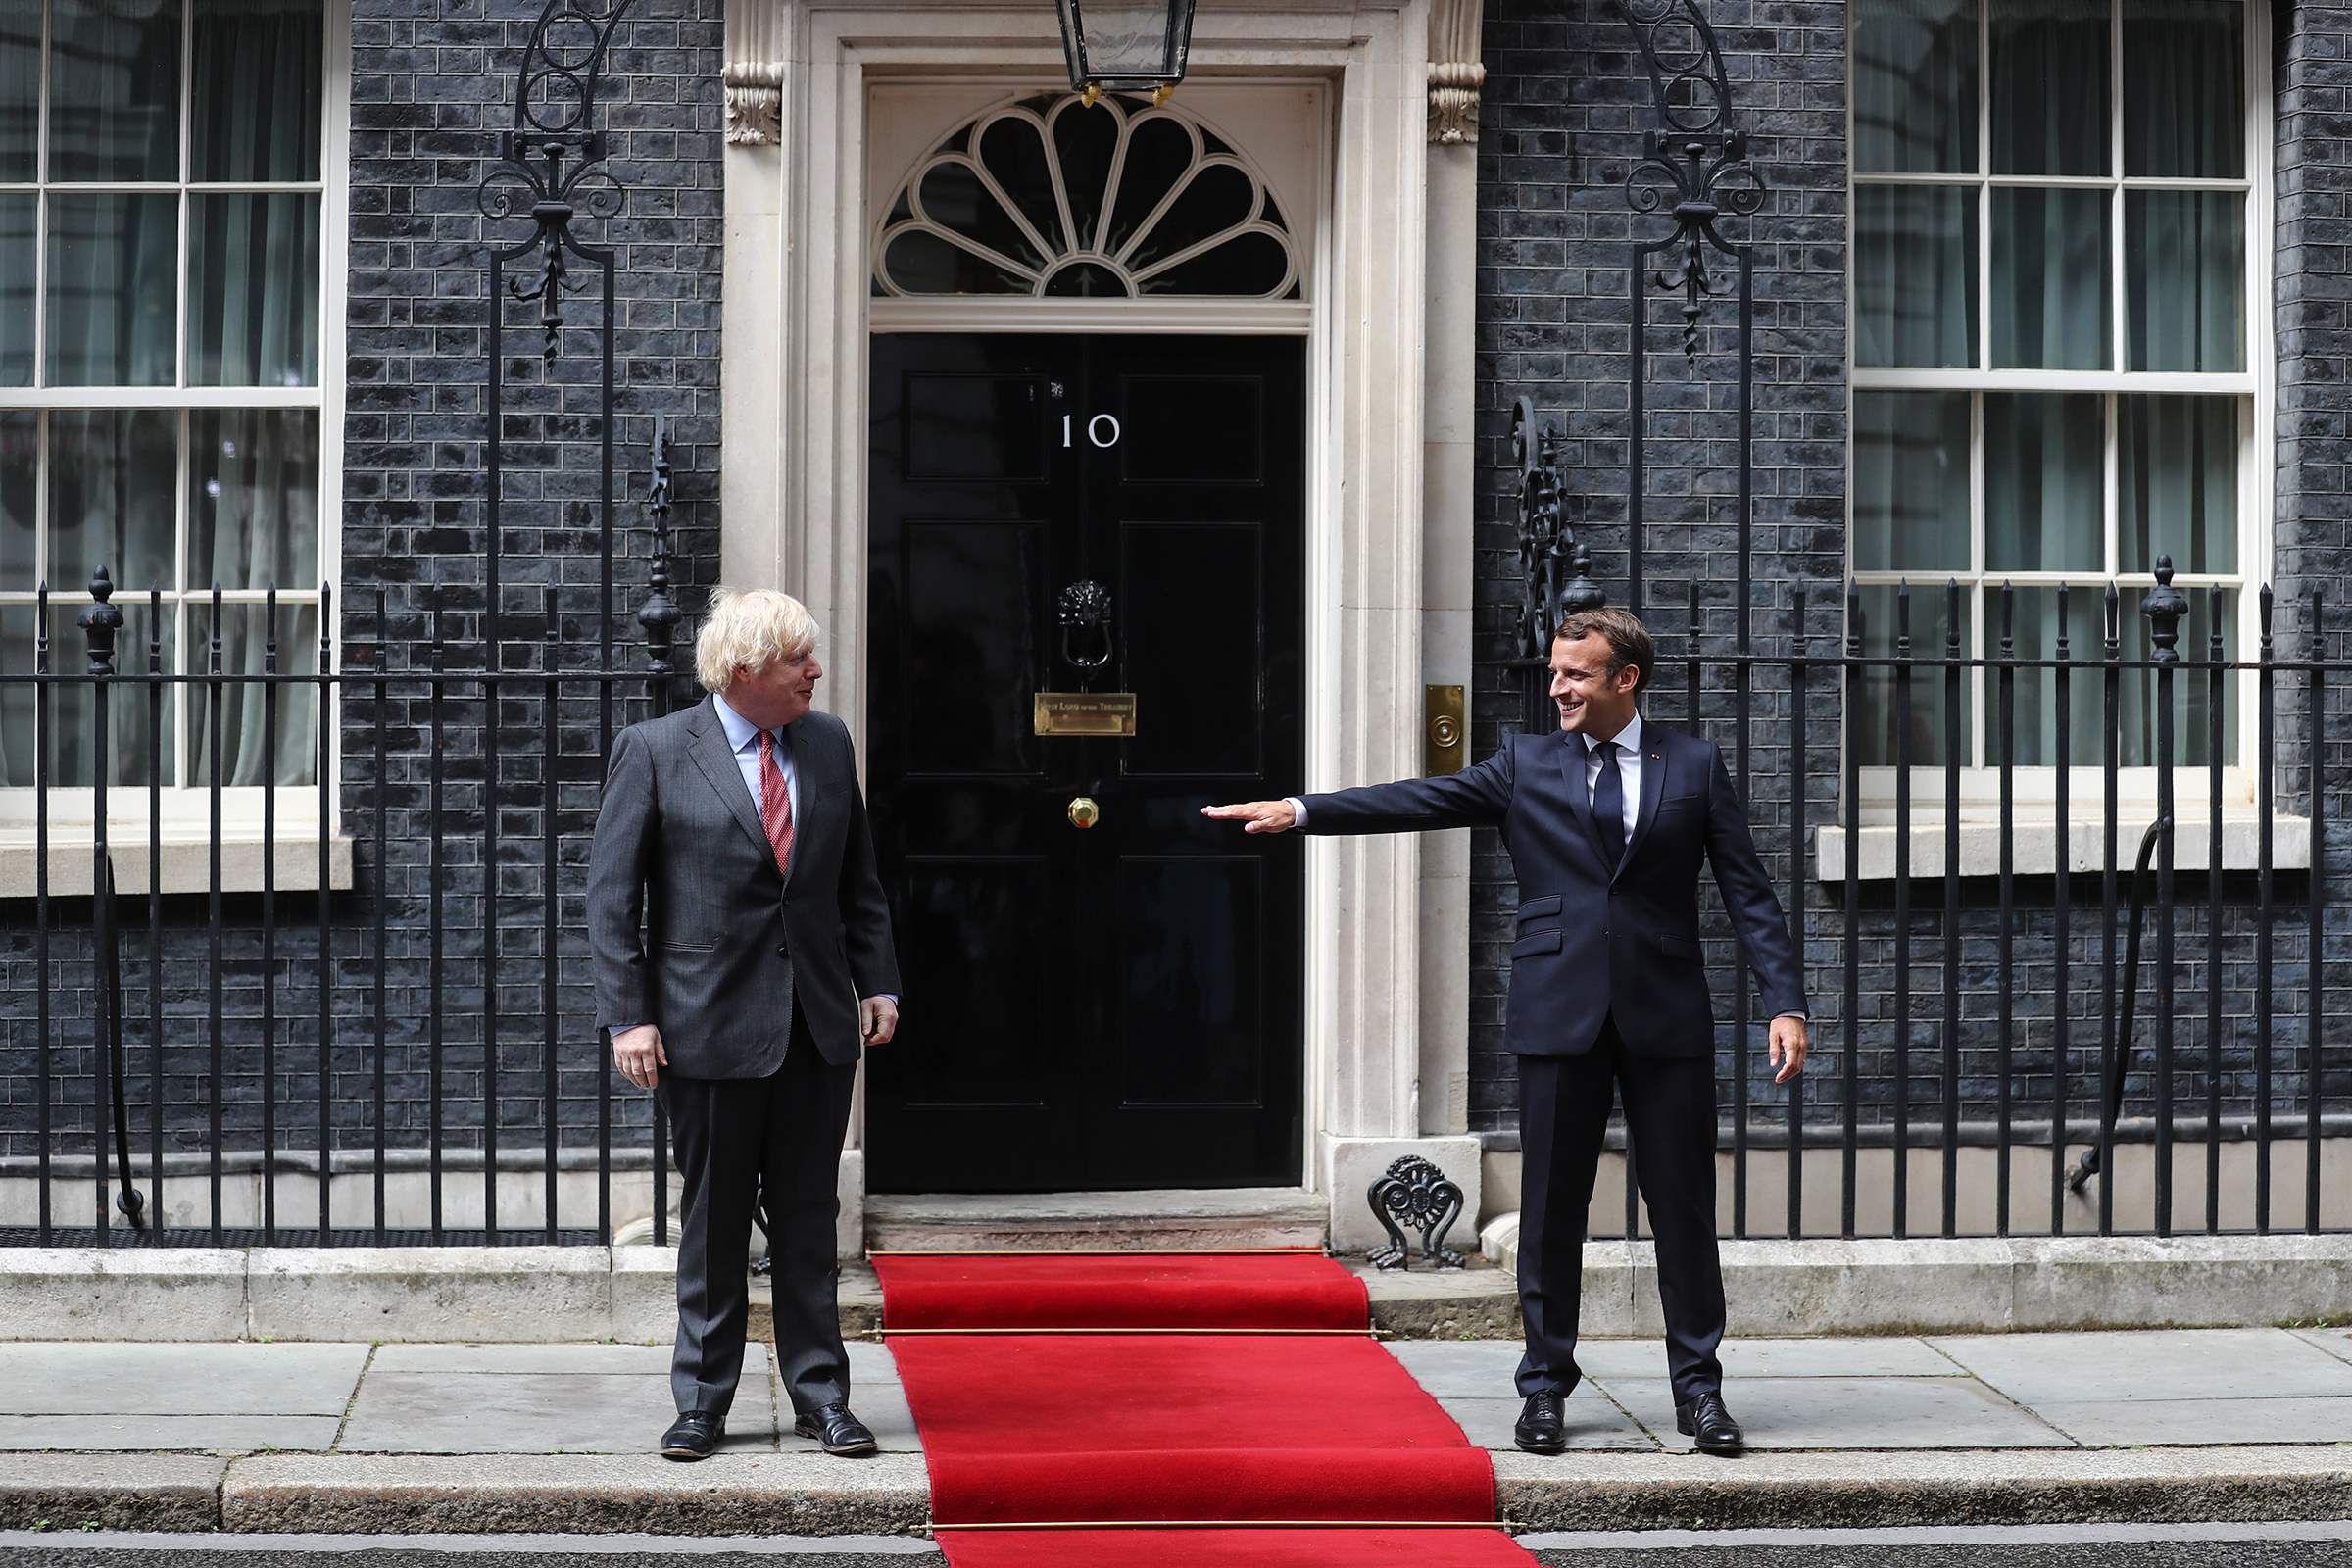 Boris Johnson, prime minister of the United Kingdom, and French President Emmanuel Macron stand socially distanced while posing for photographs at 10 Downing Street in London on June 18, 2020.